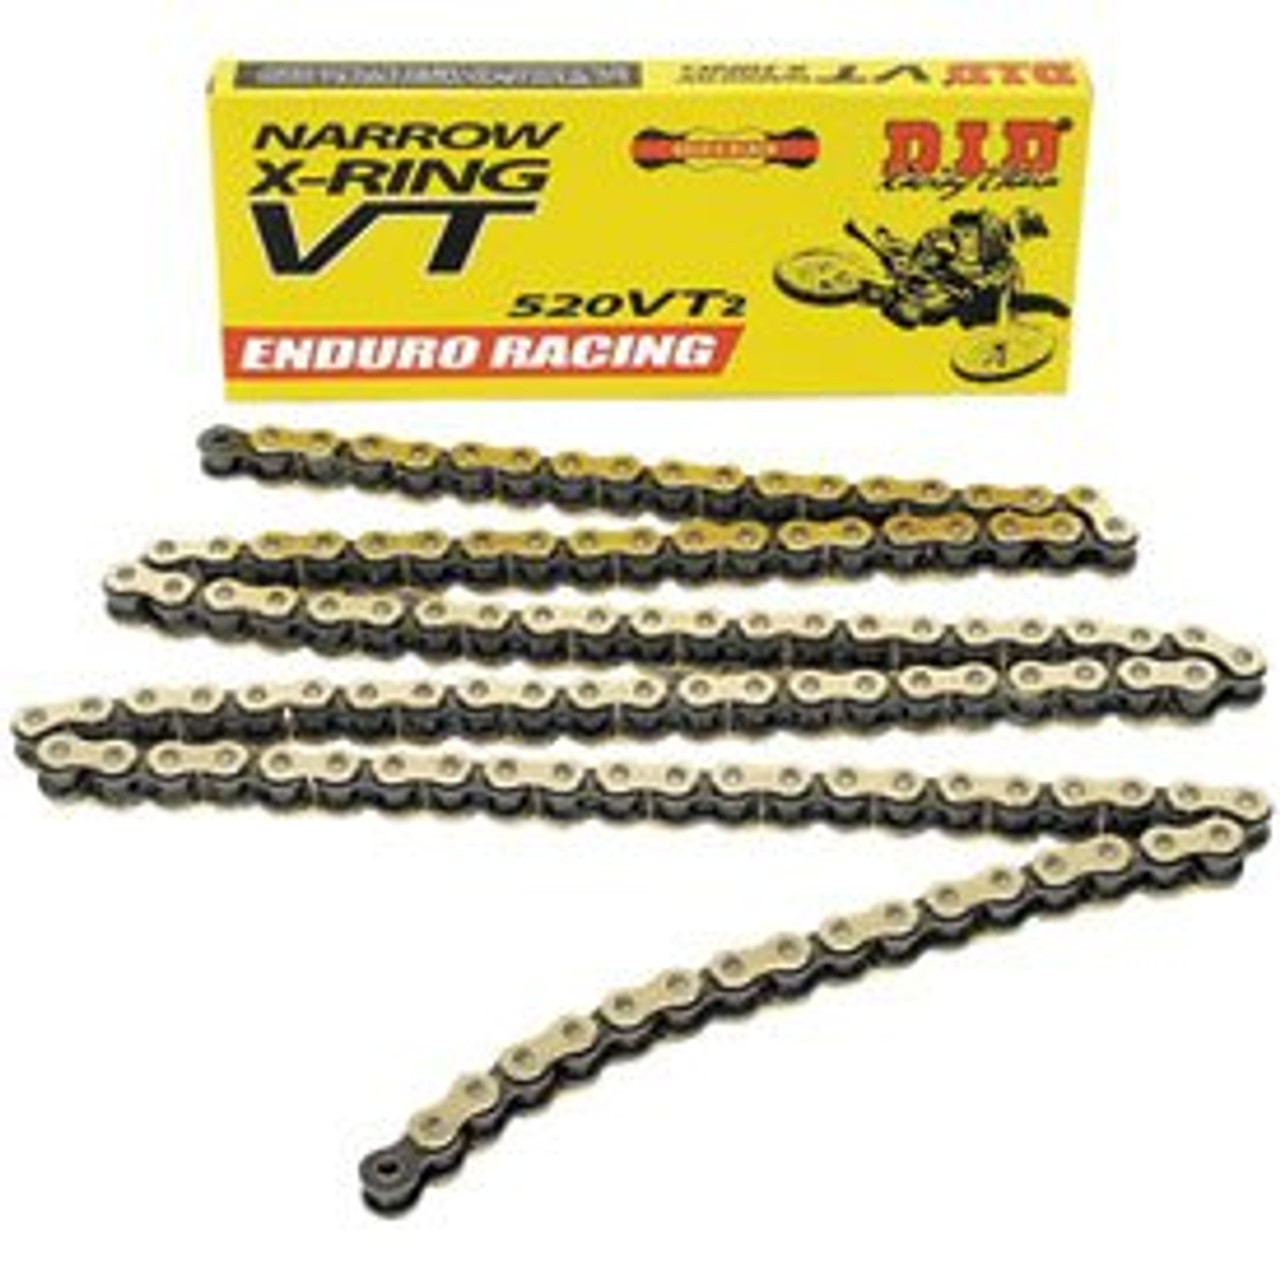 D.I.D. 520 V2 Narrow racing chain, With T-ring Technology